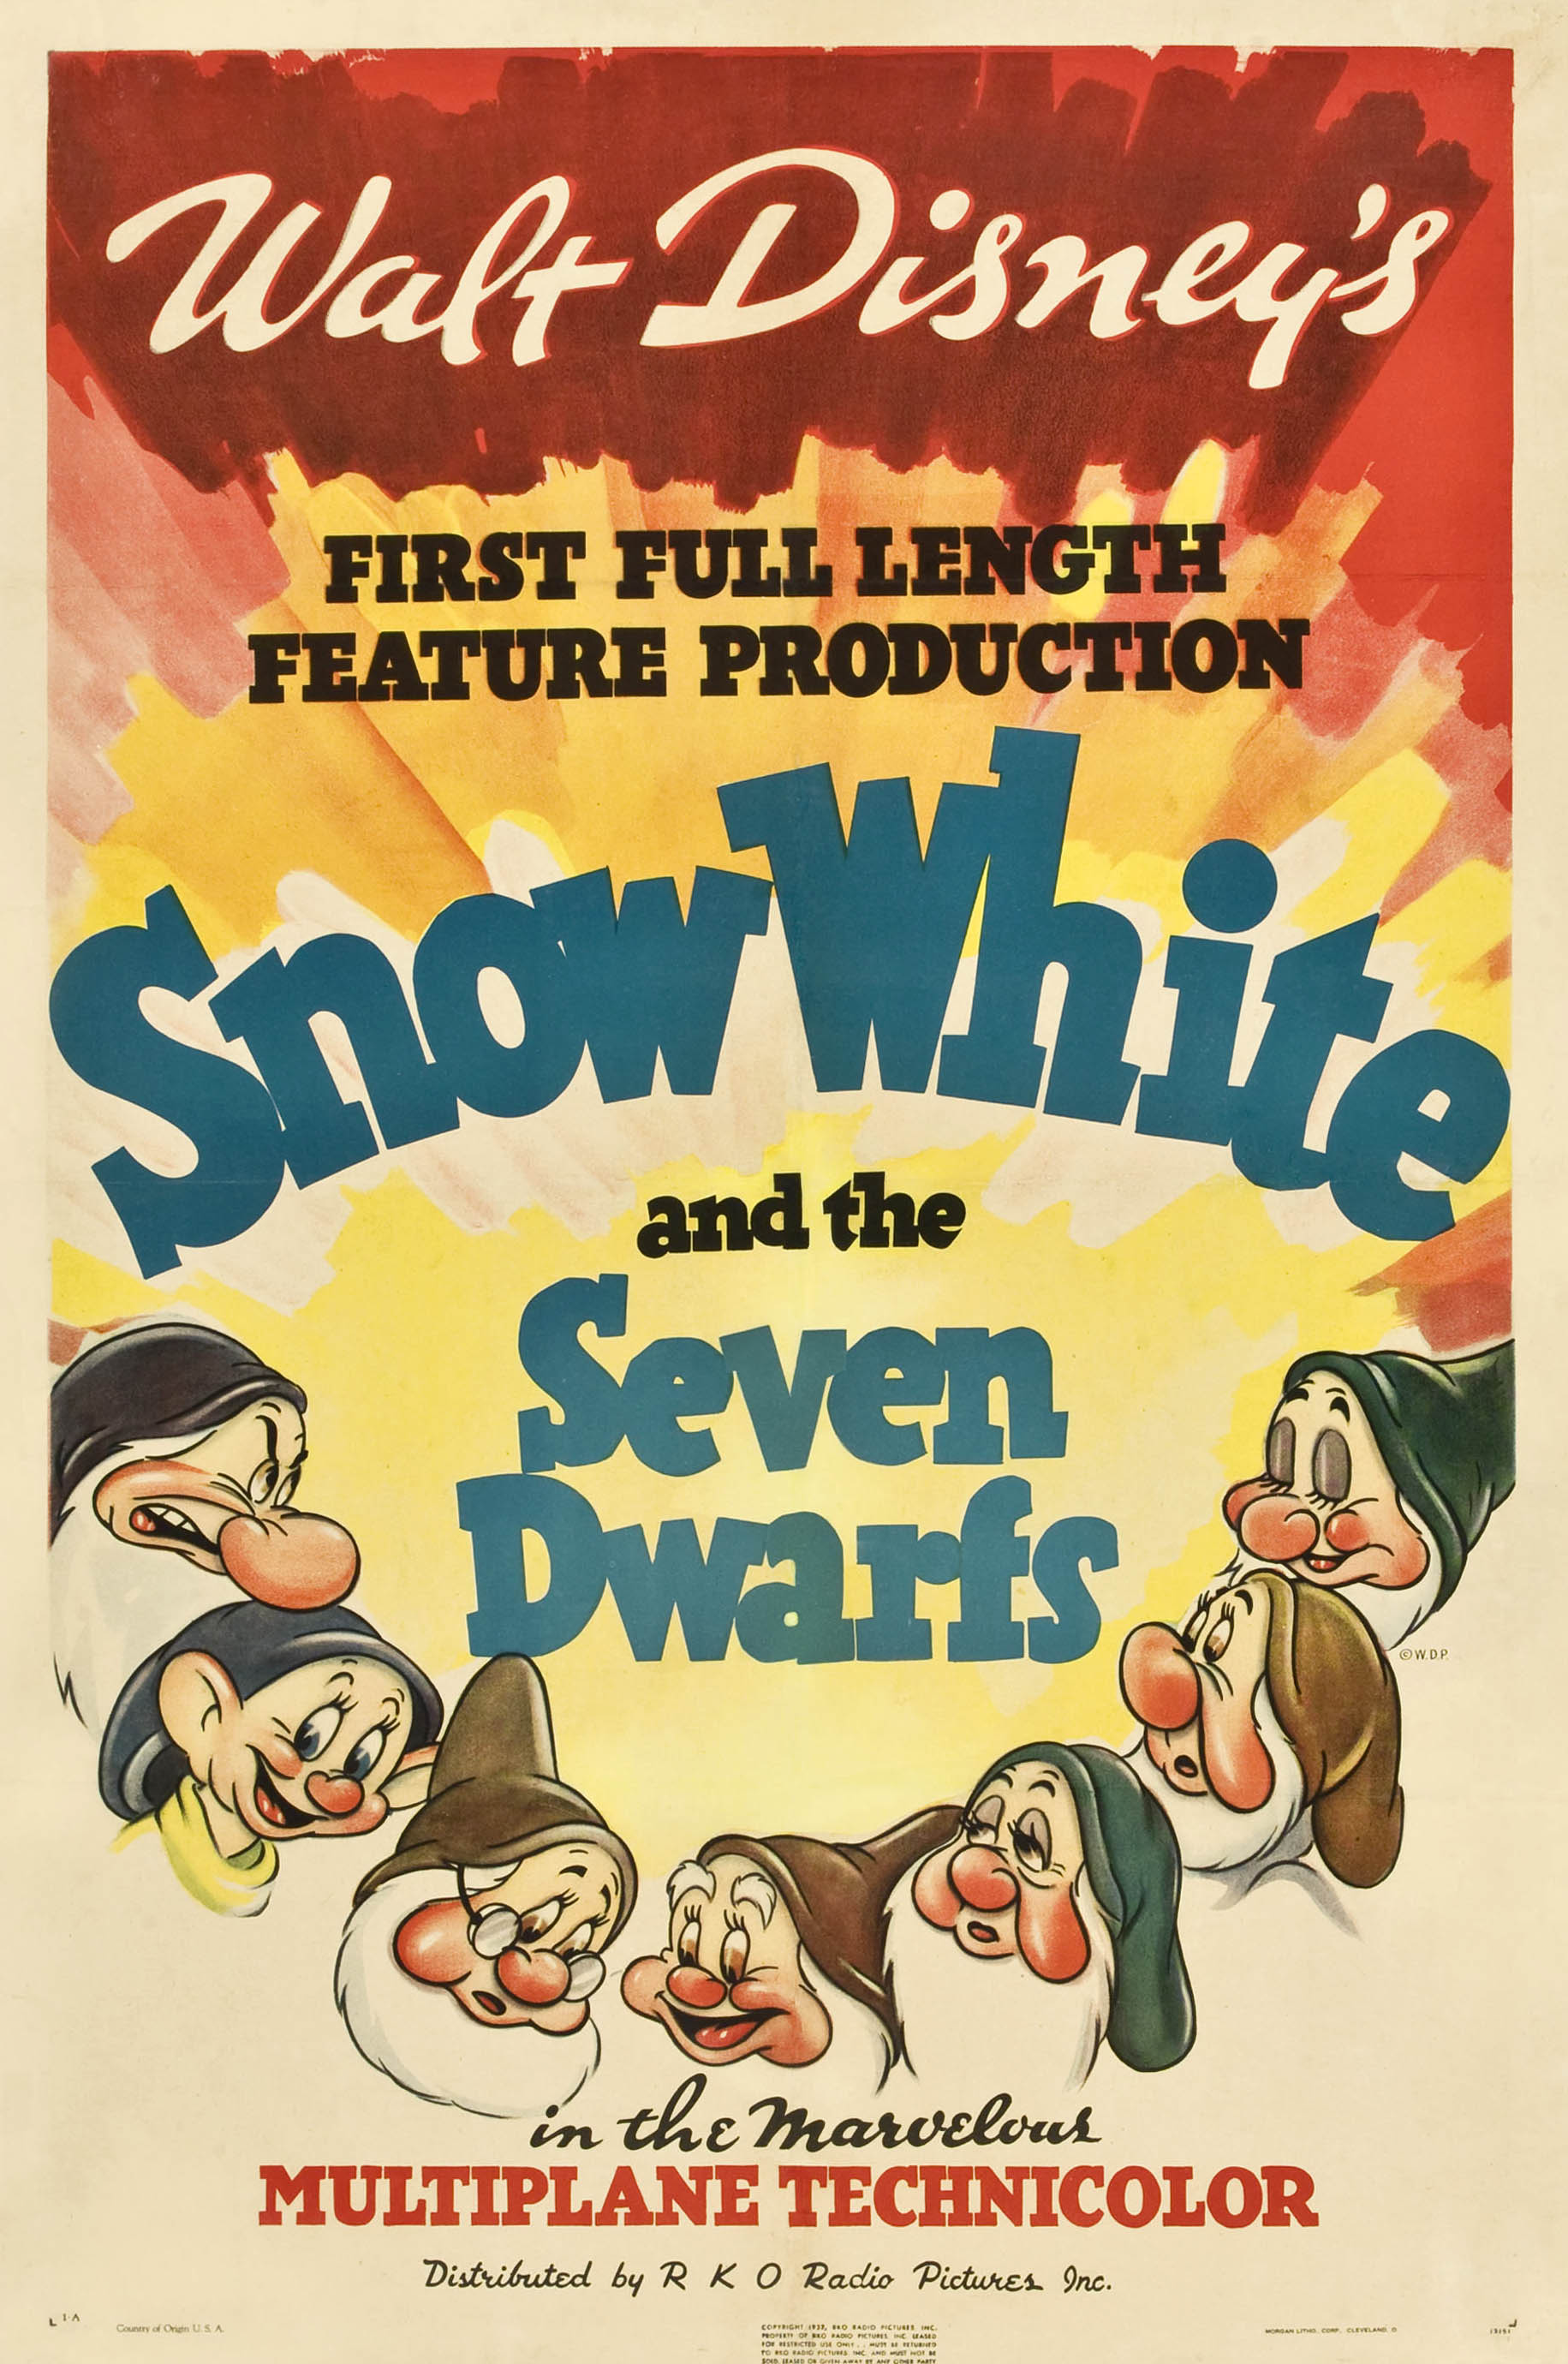 Before it was released, "Snow White and the Seven Dwarfs" was nicknamed "Disney's Folly" because nobody had ever released a feature-length animated film, and critics thought it would flop.